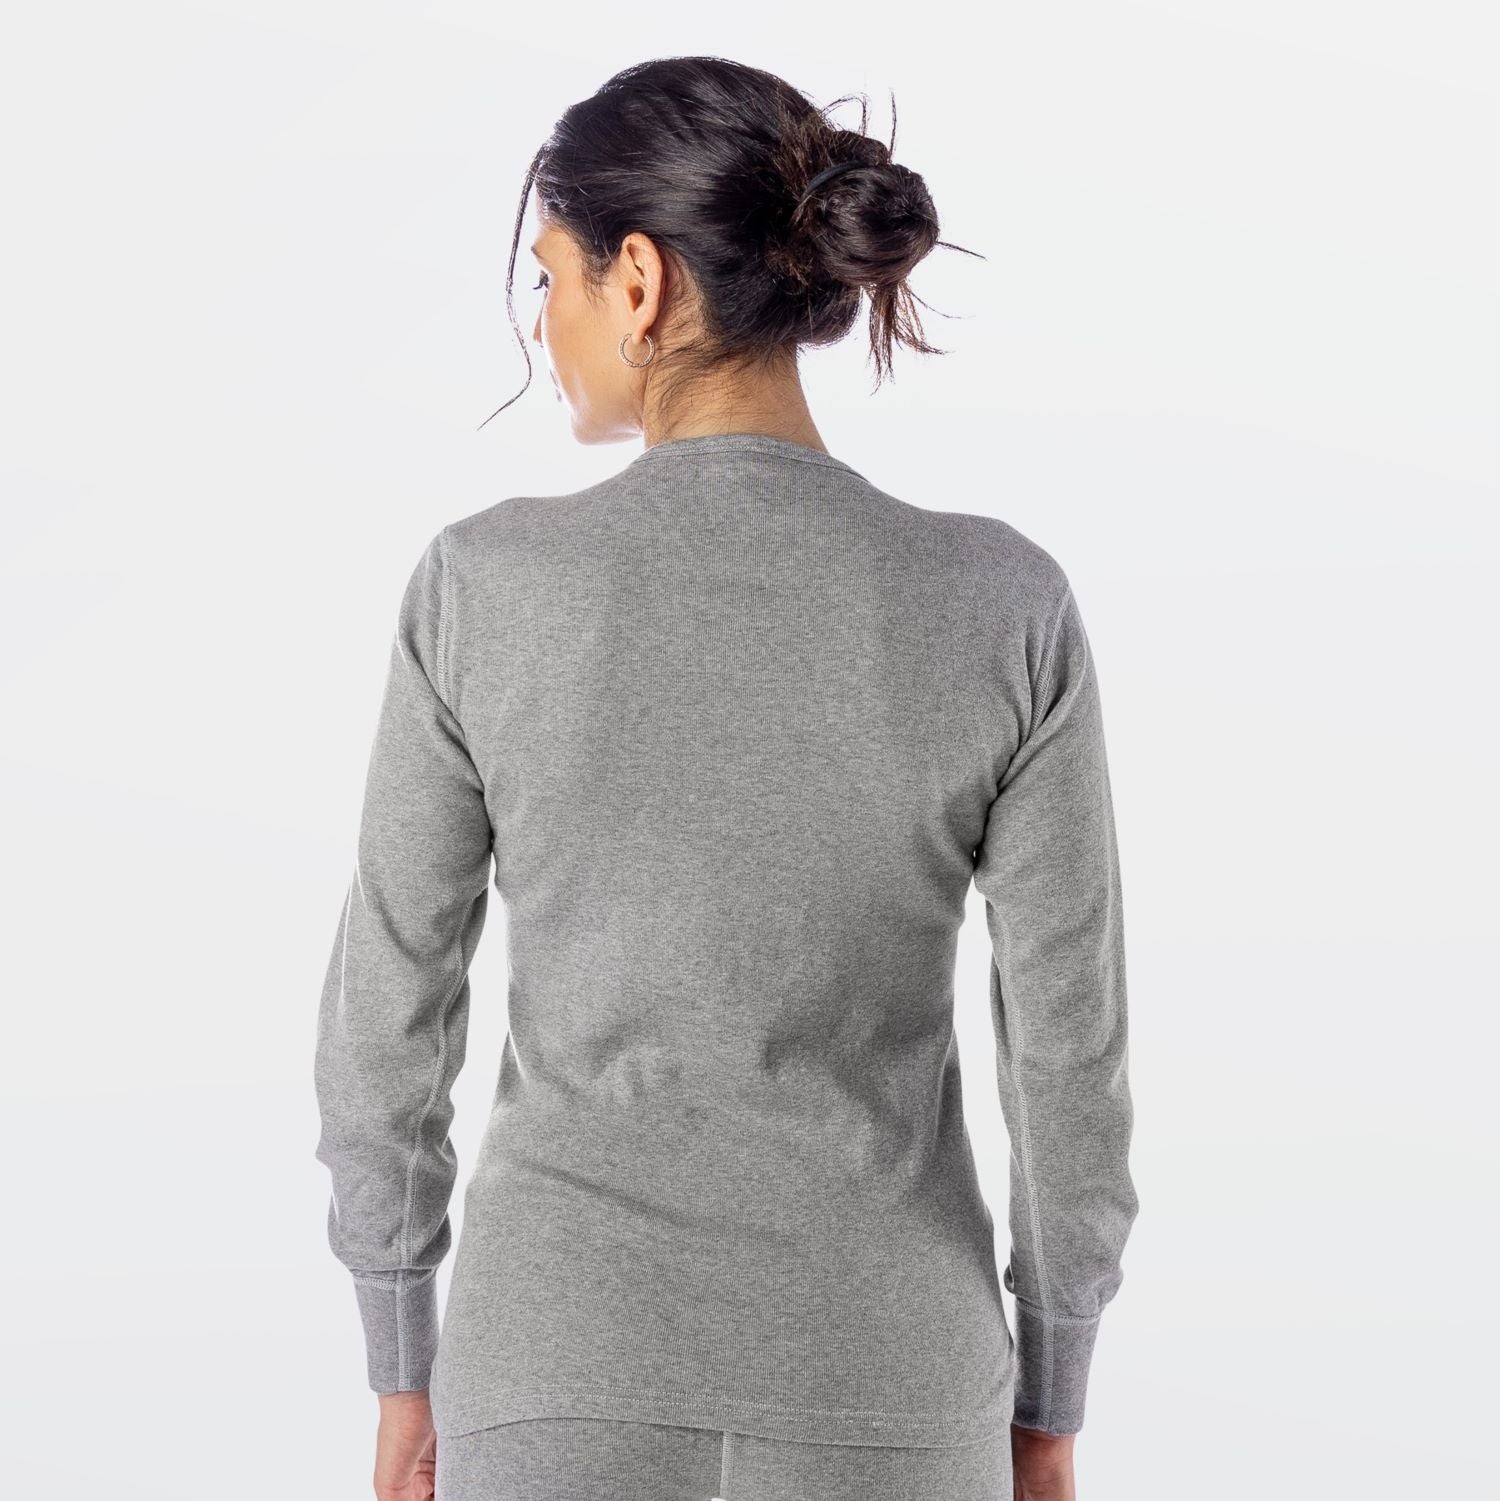 Chill Chasers Women's Clothing On Sale Up To 90% Off Retail